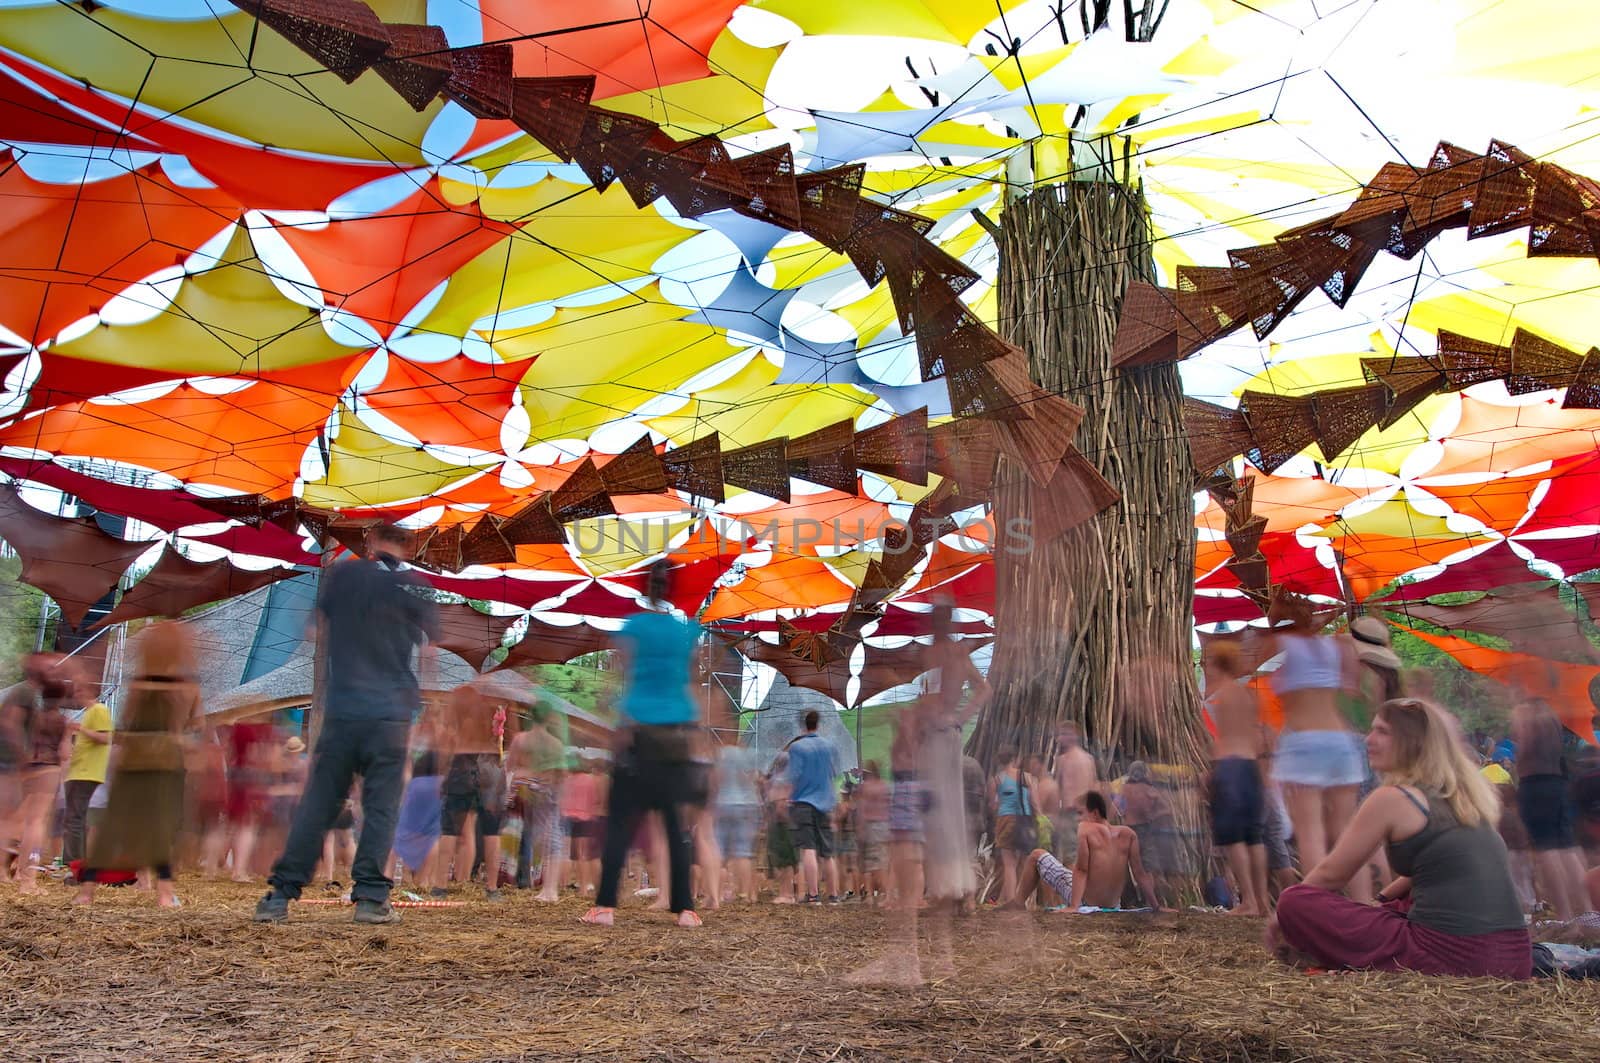 OZORA, HUNGARY - AUGUST 01: People dancing on Ozora Festival, one of the greatest psychedelic music gathering in Euorpe. Ozora, Hungary, Europe August 01, 2014.